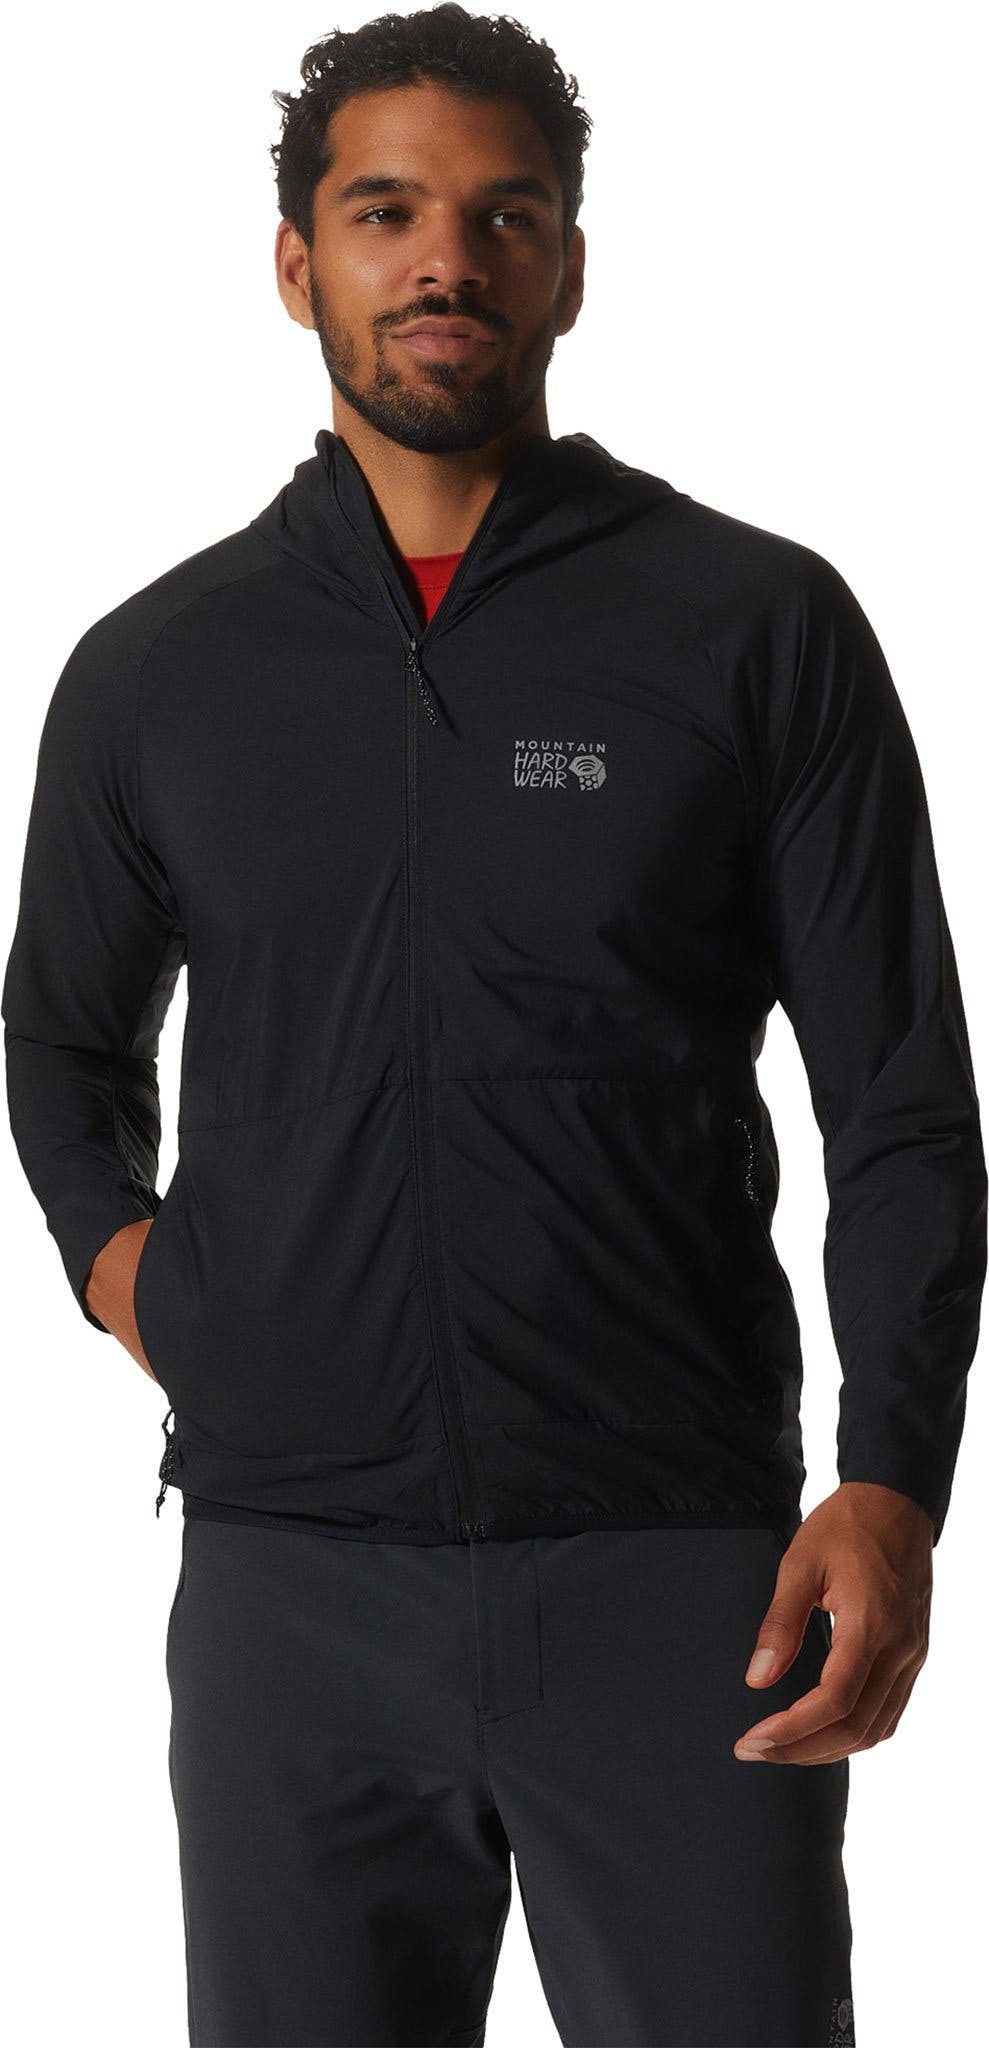 Product image for Kor AirShell™ Hoody - Men's